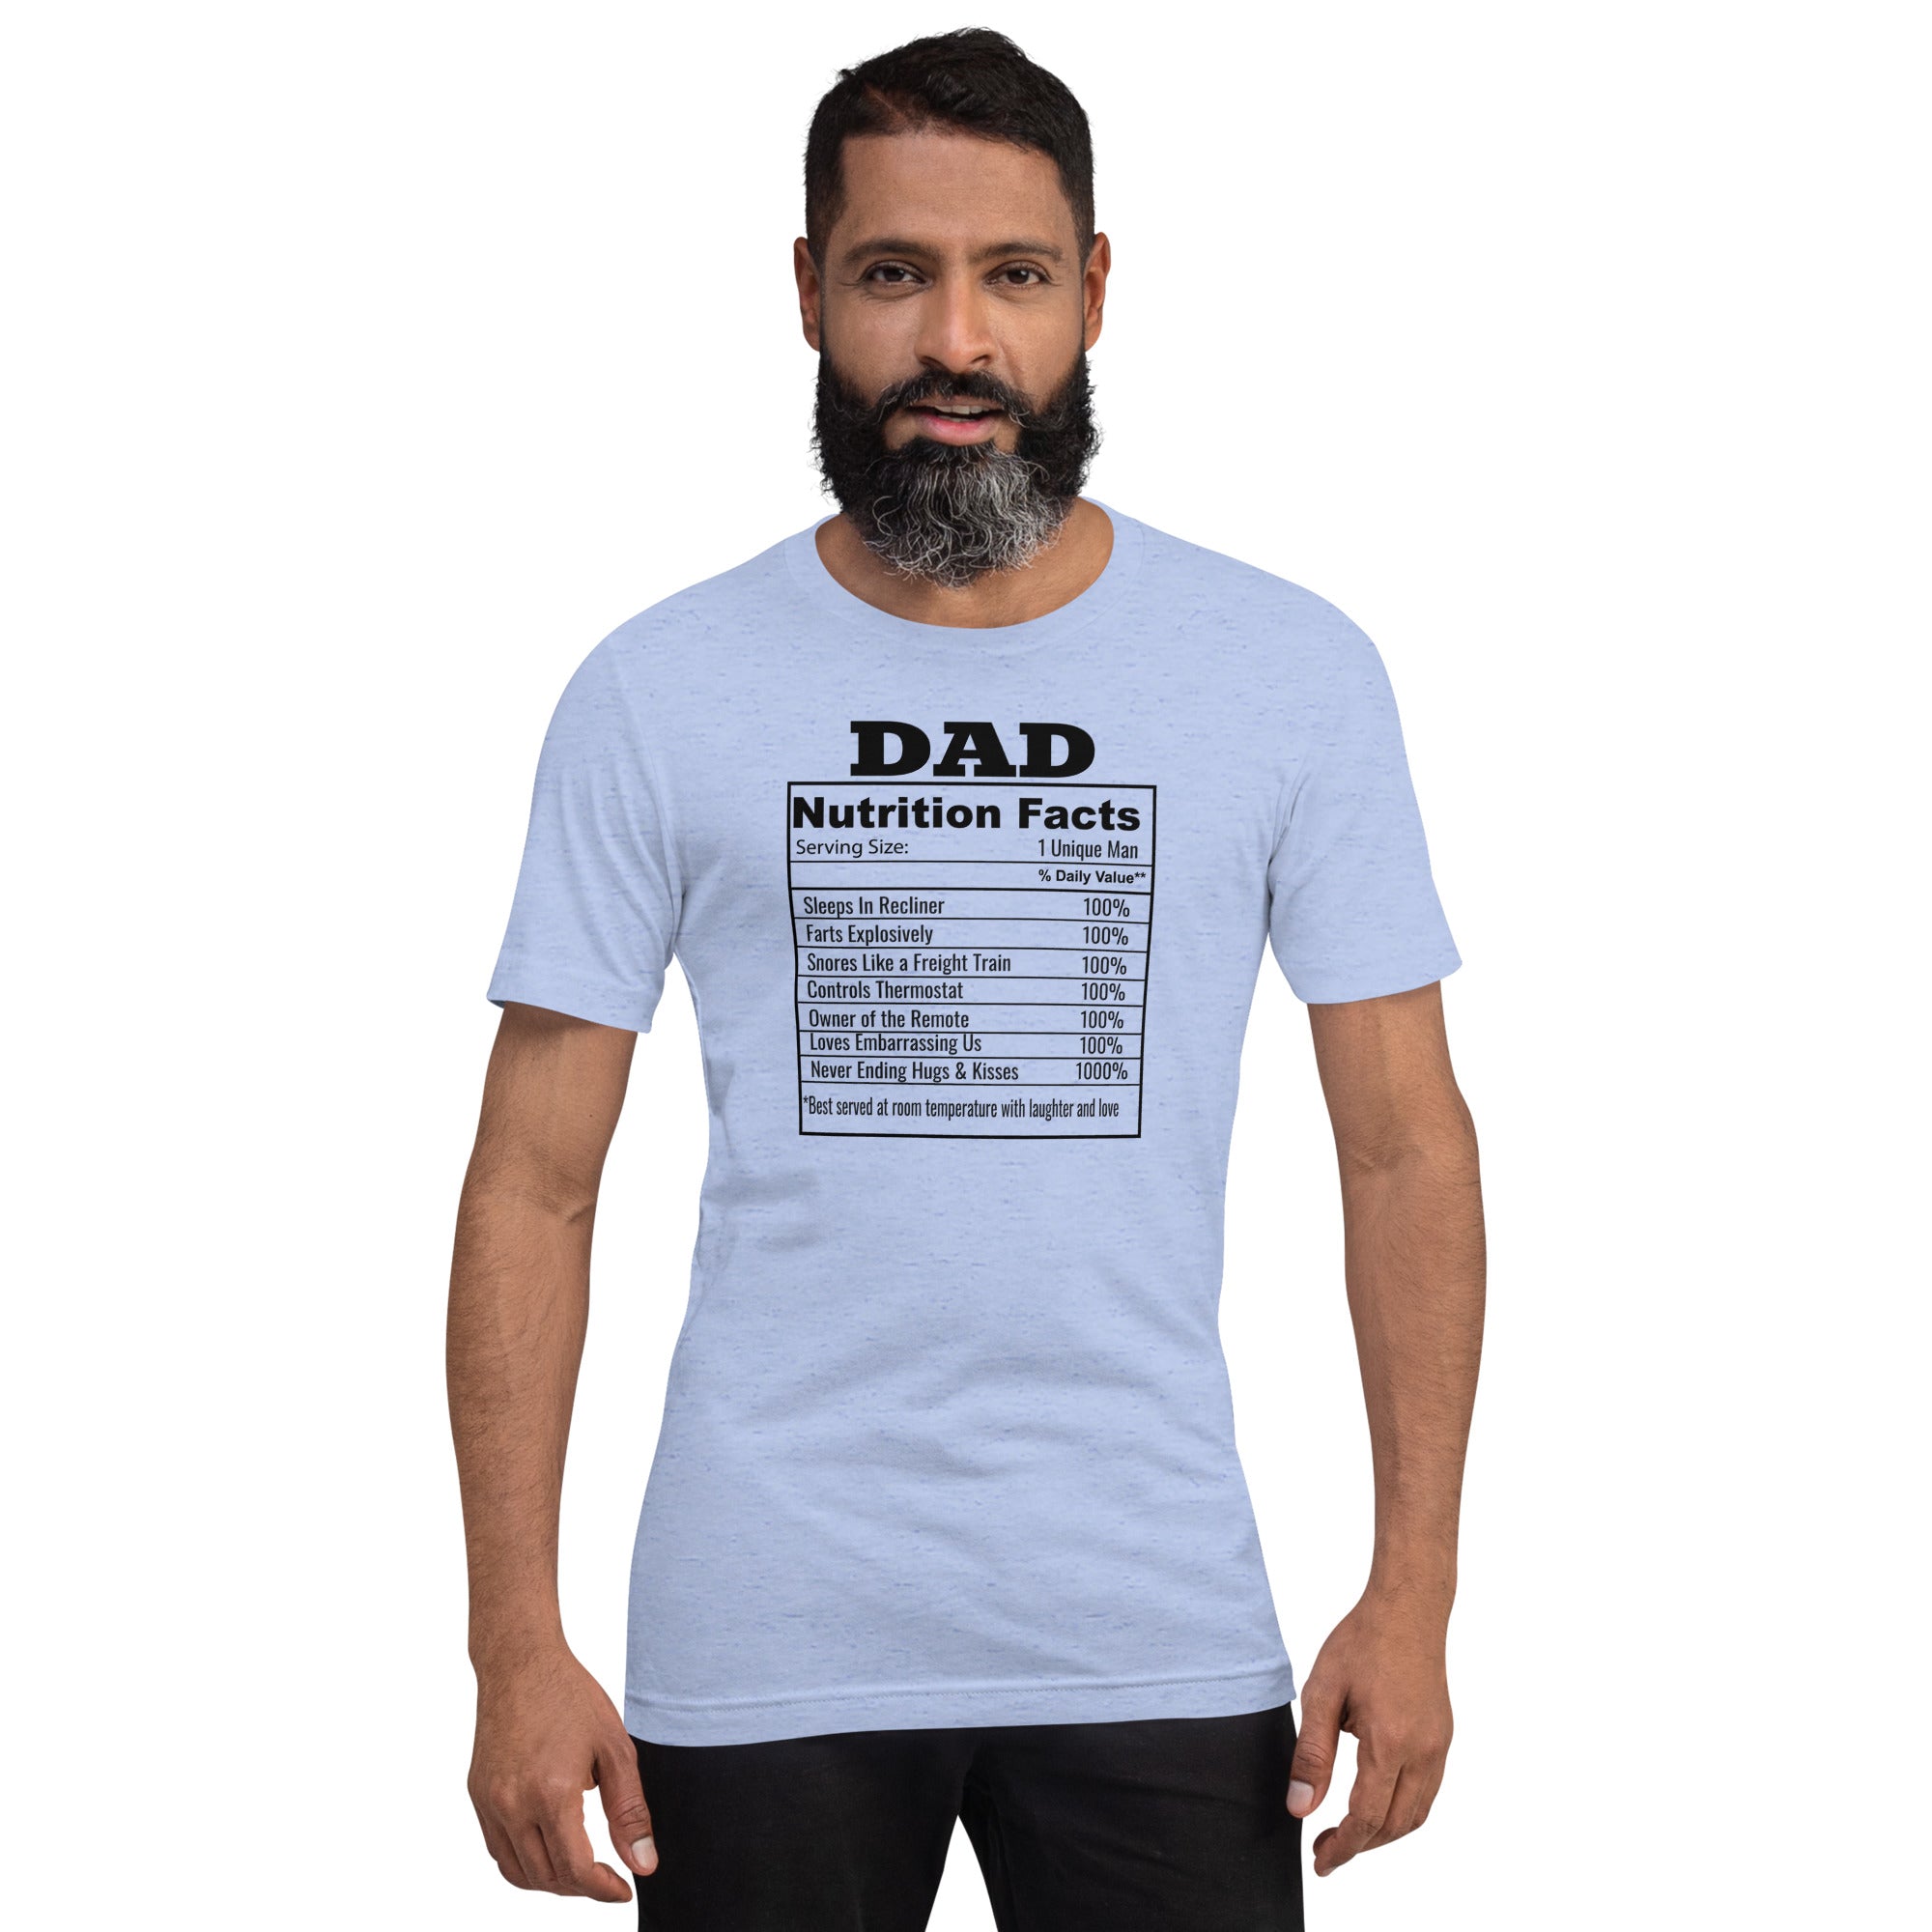 Funny Father's Day Nutrition Facts T-Shirt That Says Dad Snores, Farts and More